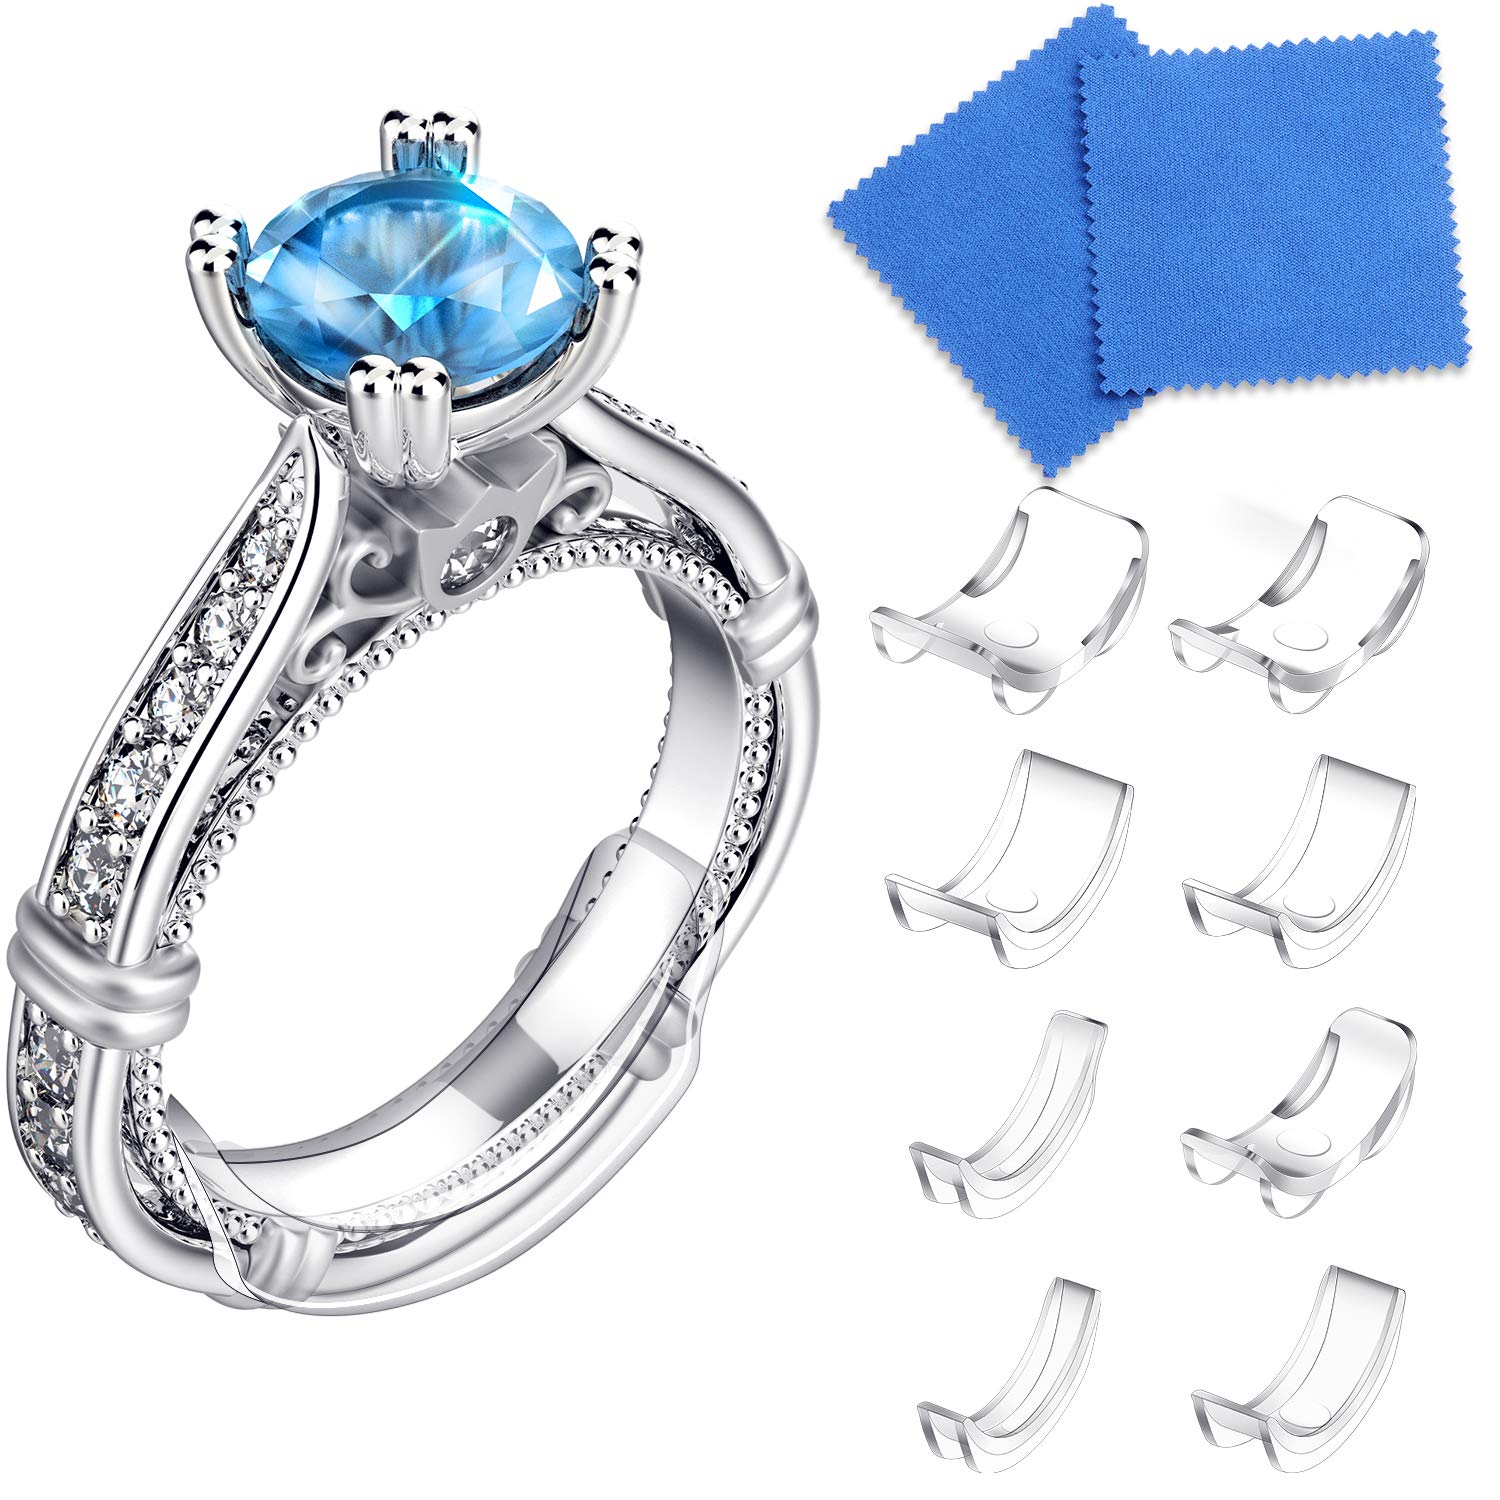 Ring Size Adjuster For Loose Rings Invisible Transparent, 51% OFF